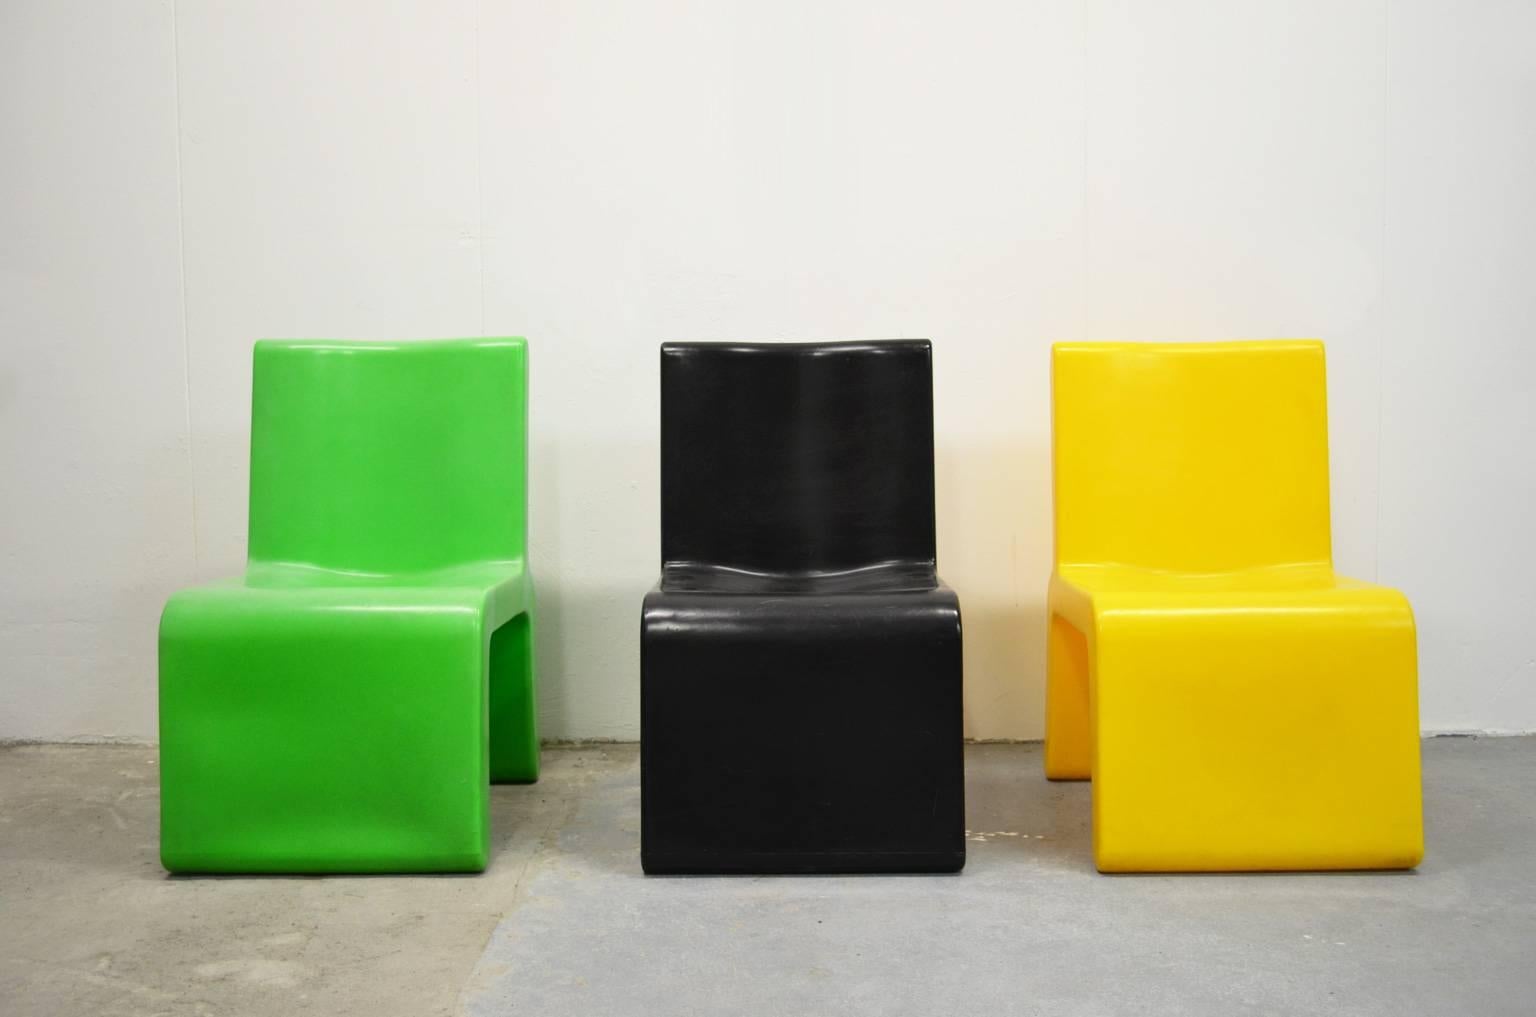 WL&T, the shop concept of the Belgian fashion designer Walter van Beirendonck, stands for 'Wild & Lethal Trash'. The store concept is mentioned in the book about Marc Newson, by Alice Rawsthorn (London 1999). The chairs are marked. The chairs are